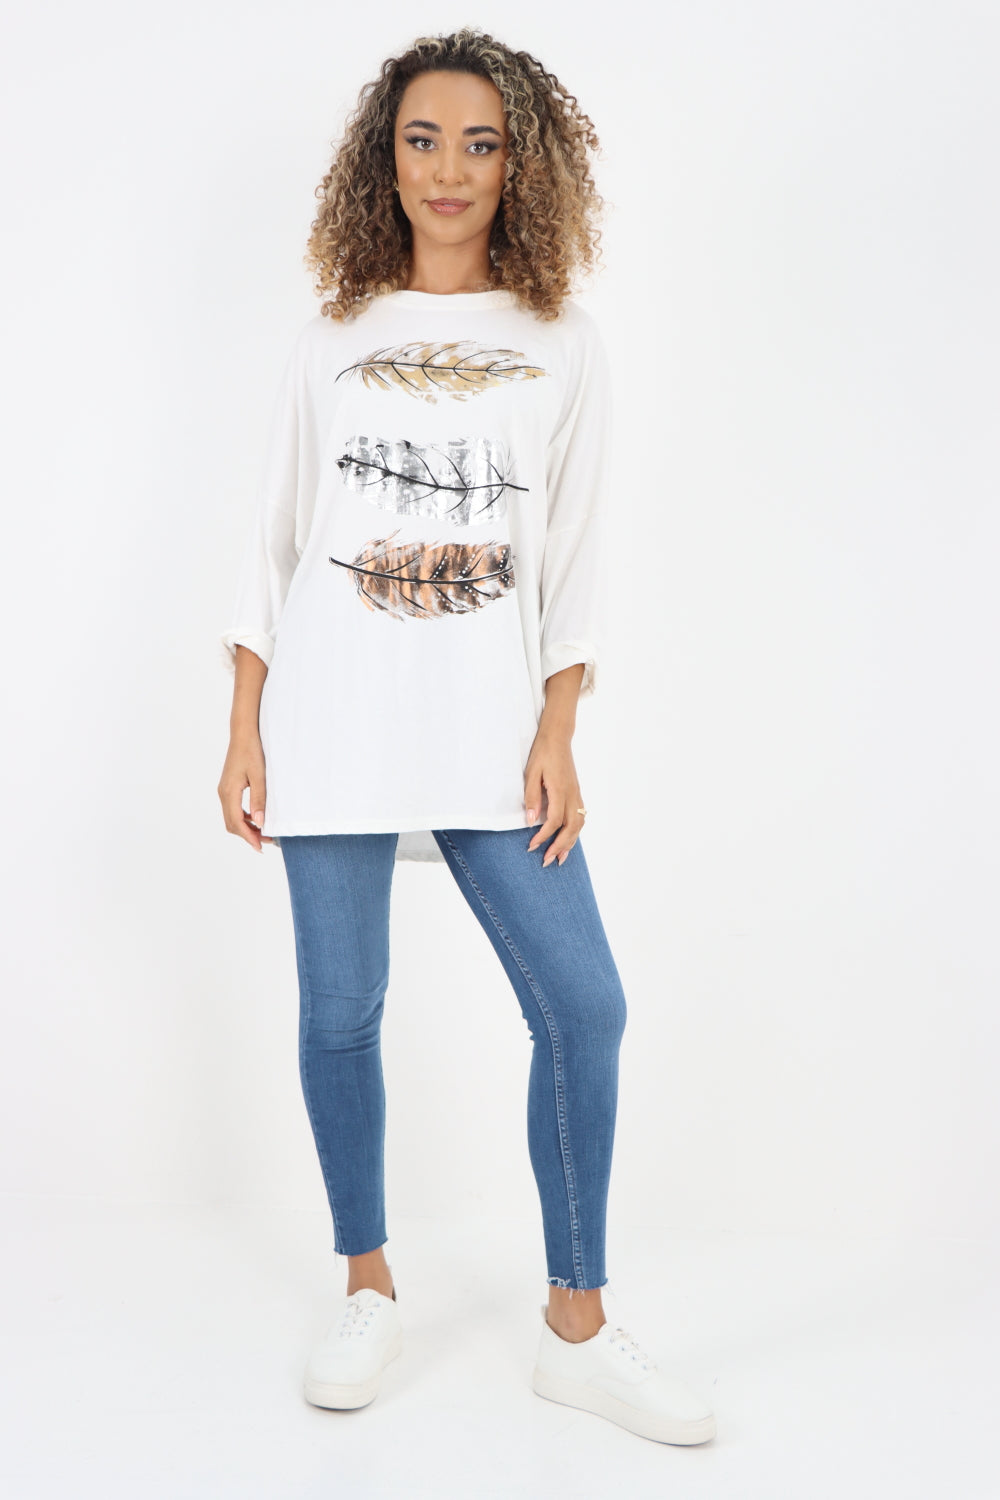 Italian Foil Feather Print Round Neck Jersey Tunic Top